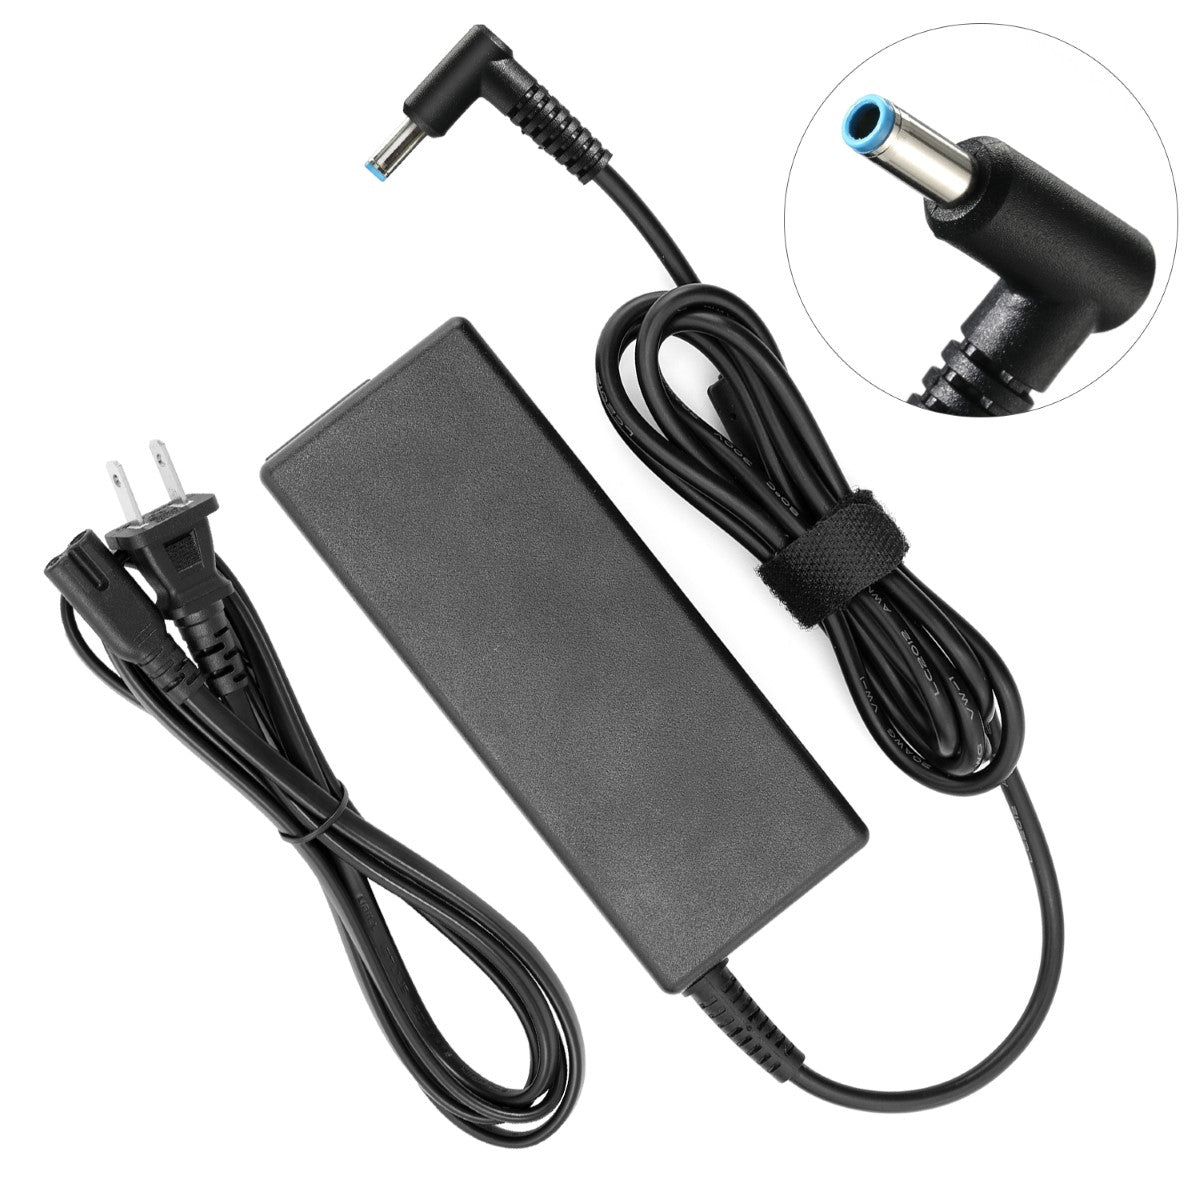 AC Adapter Charger for HP Envy Touchsmart 17-j043cl Notebook.